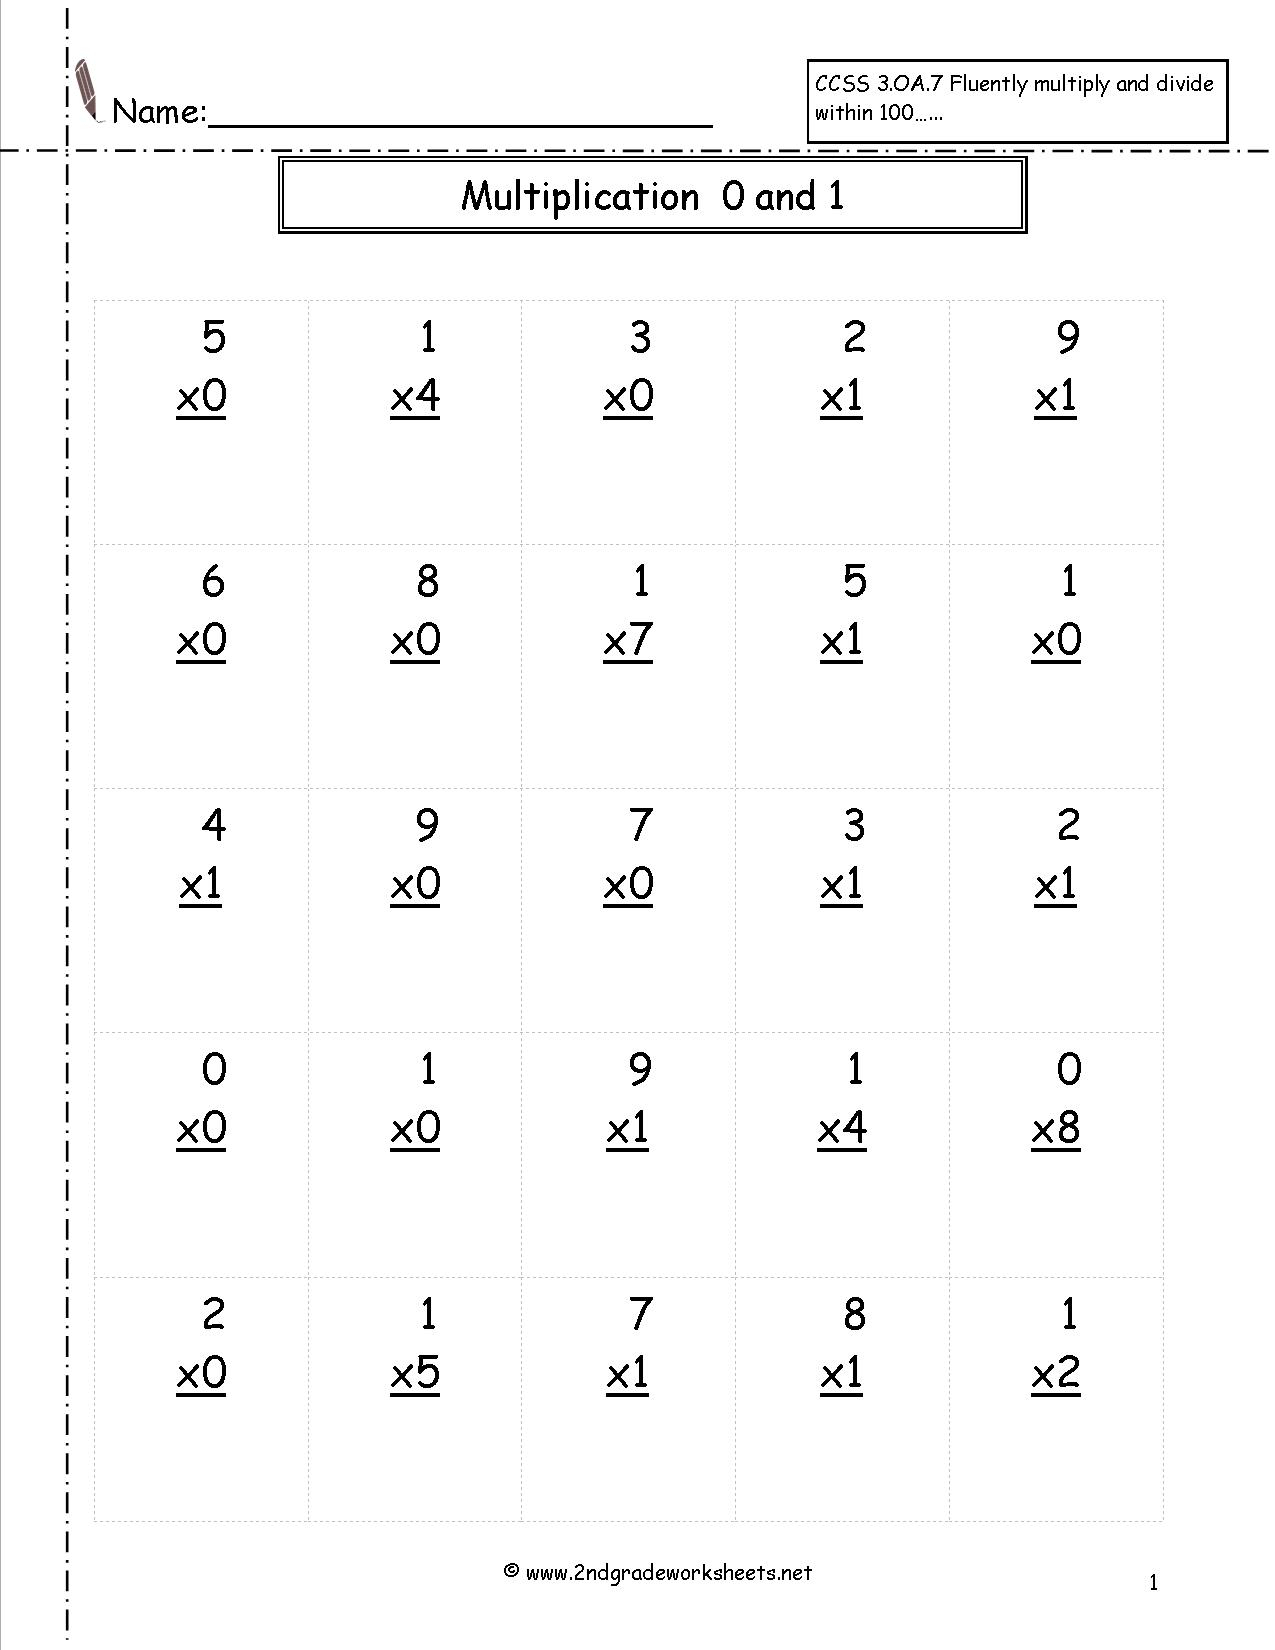 Multiplication Problems 4Th Grade For Printable pertaining to Printable Multiplication Problems For 4Th Grade